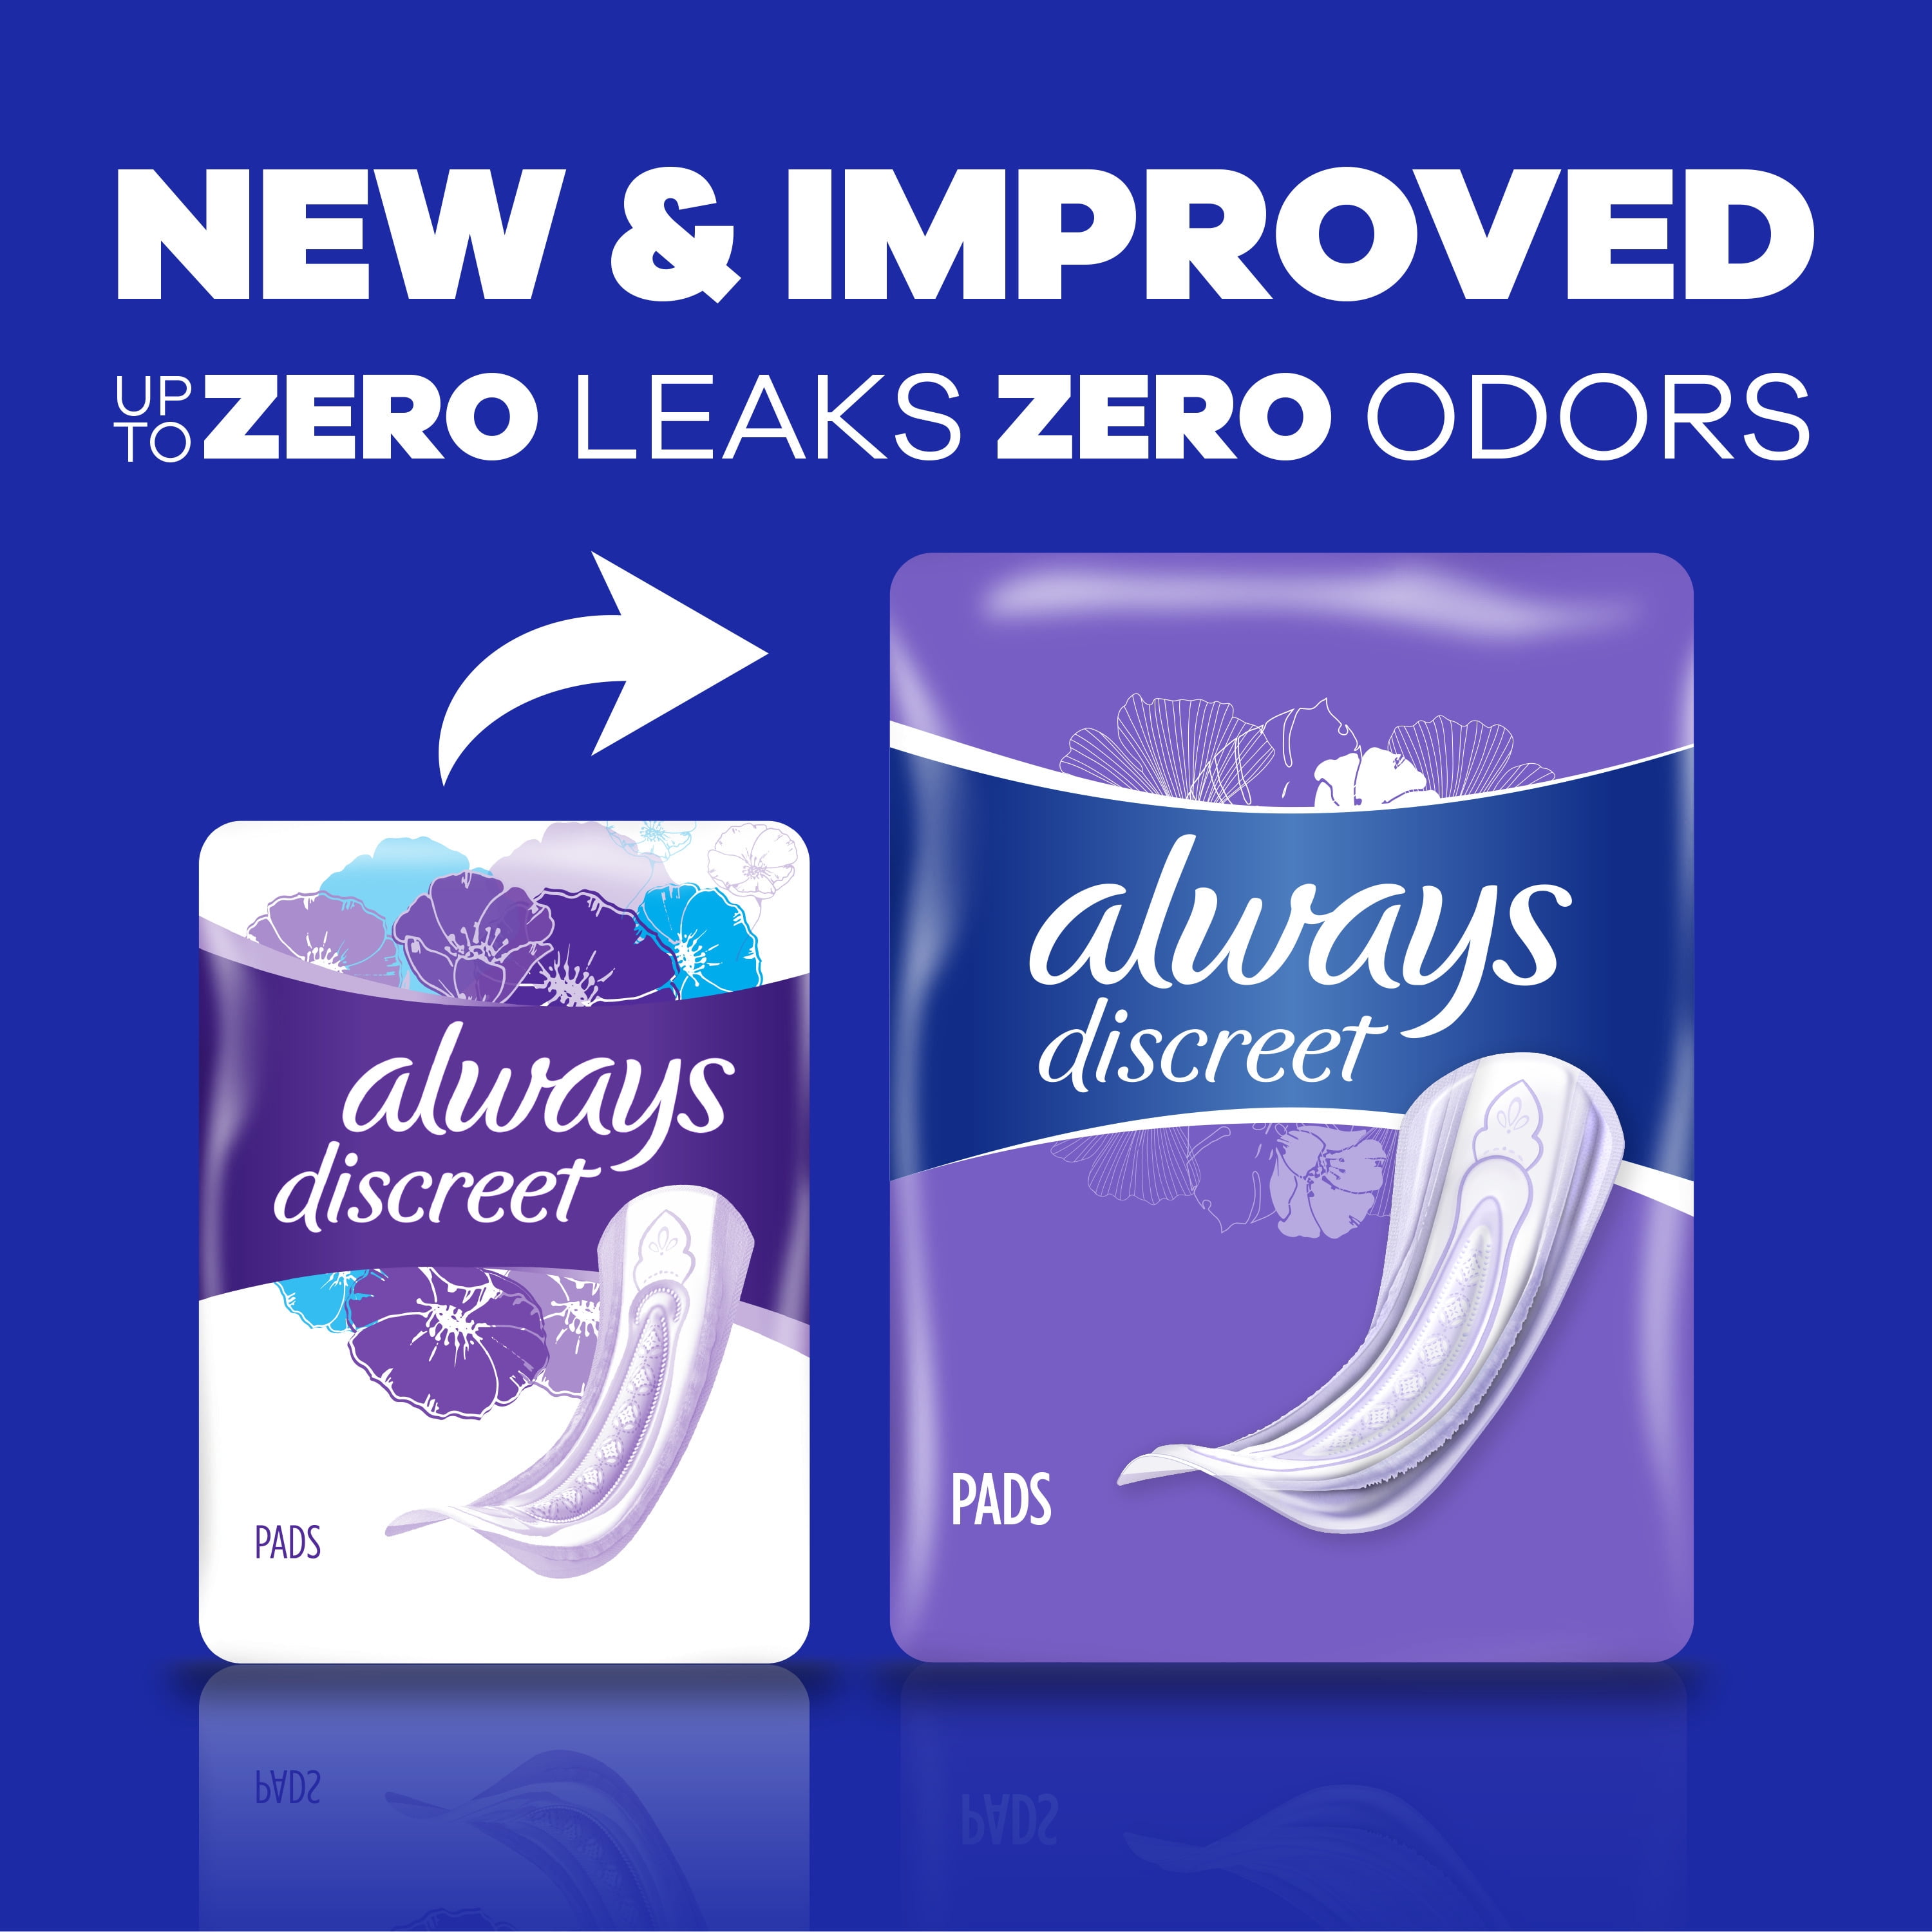 Always Discreet Moderate Absorbency Incontinence Pads for Women, 198 ct -  Ralphs